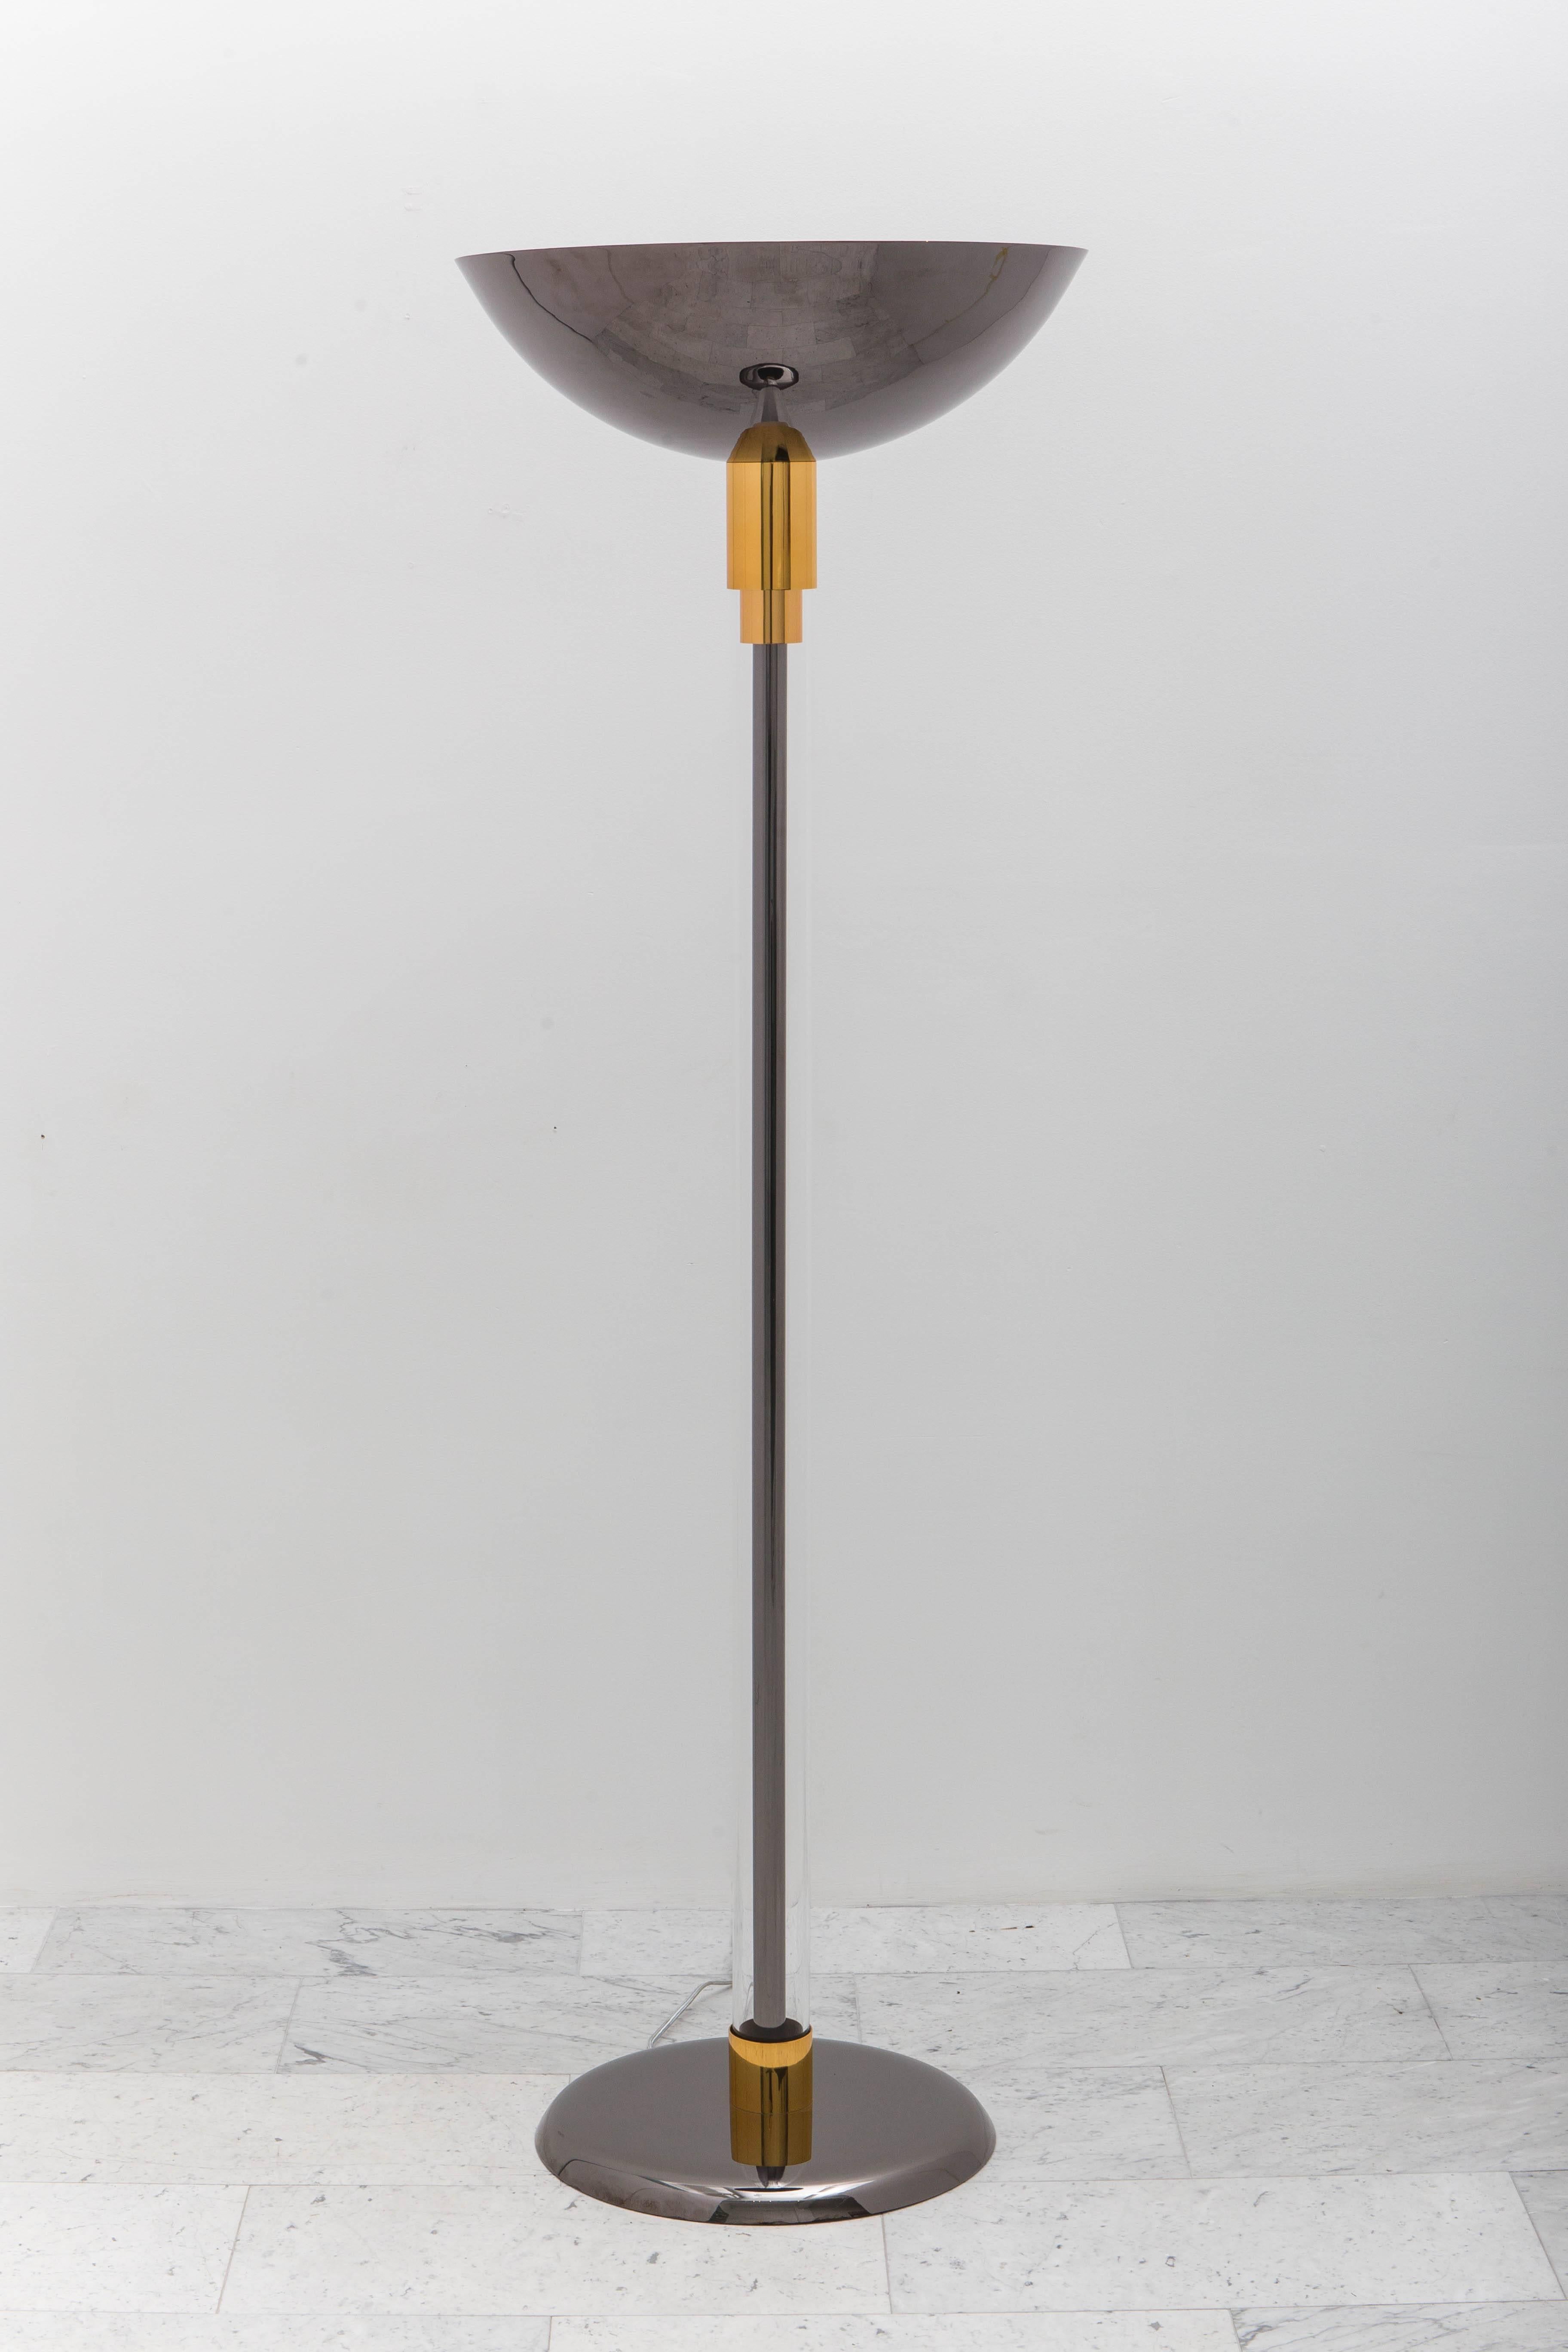 A pair of large torchieres (Torchiere #3) by Karl Springer finished in a sophisticated pairing of metals – Architectural polished gold-bronze and gunmetal. Each lamp features a gunmetal stem housed within a lucite cylindrical body supporting a 22″